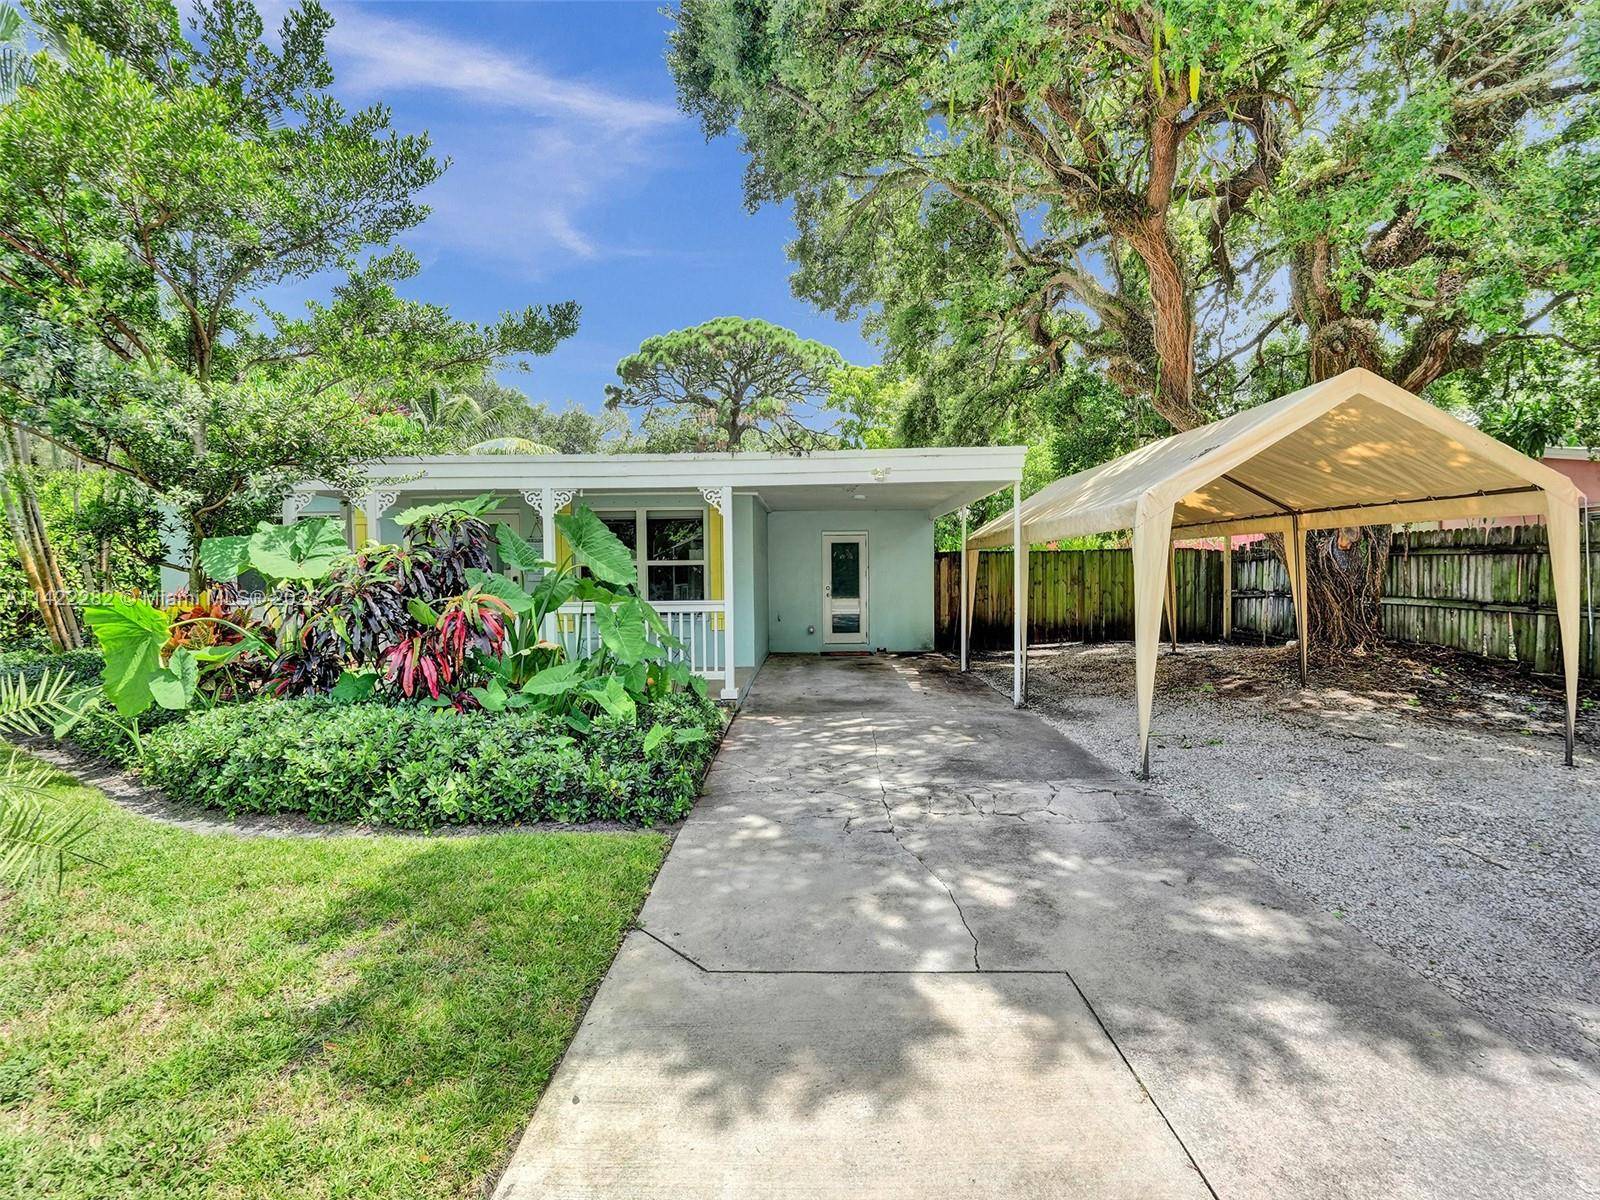 Furnished beach vibe, tropical oasis cottage style 2 1 home situated on a fenced just under 1 4 acre lot, mins from downtown Ft Laud the beaches.